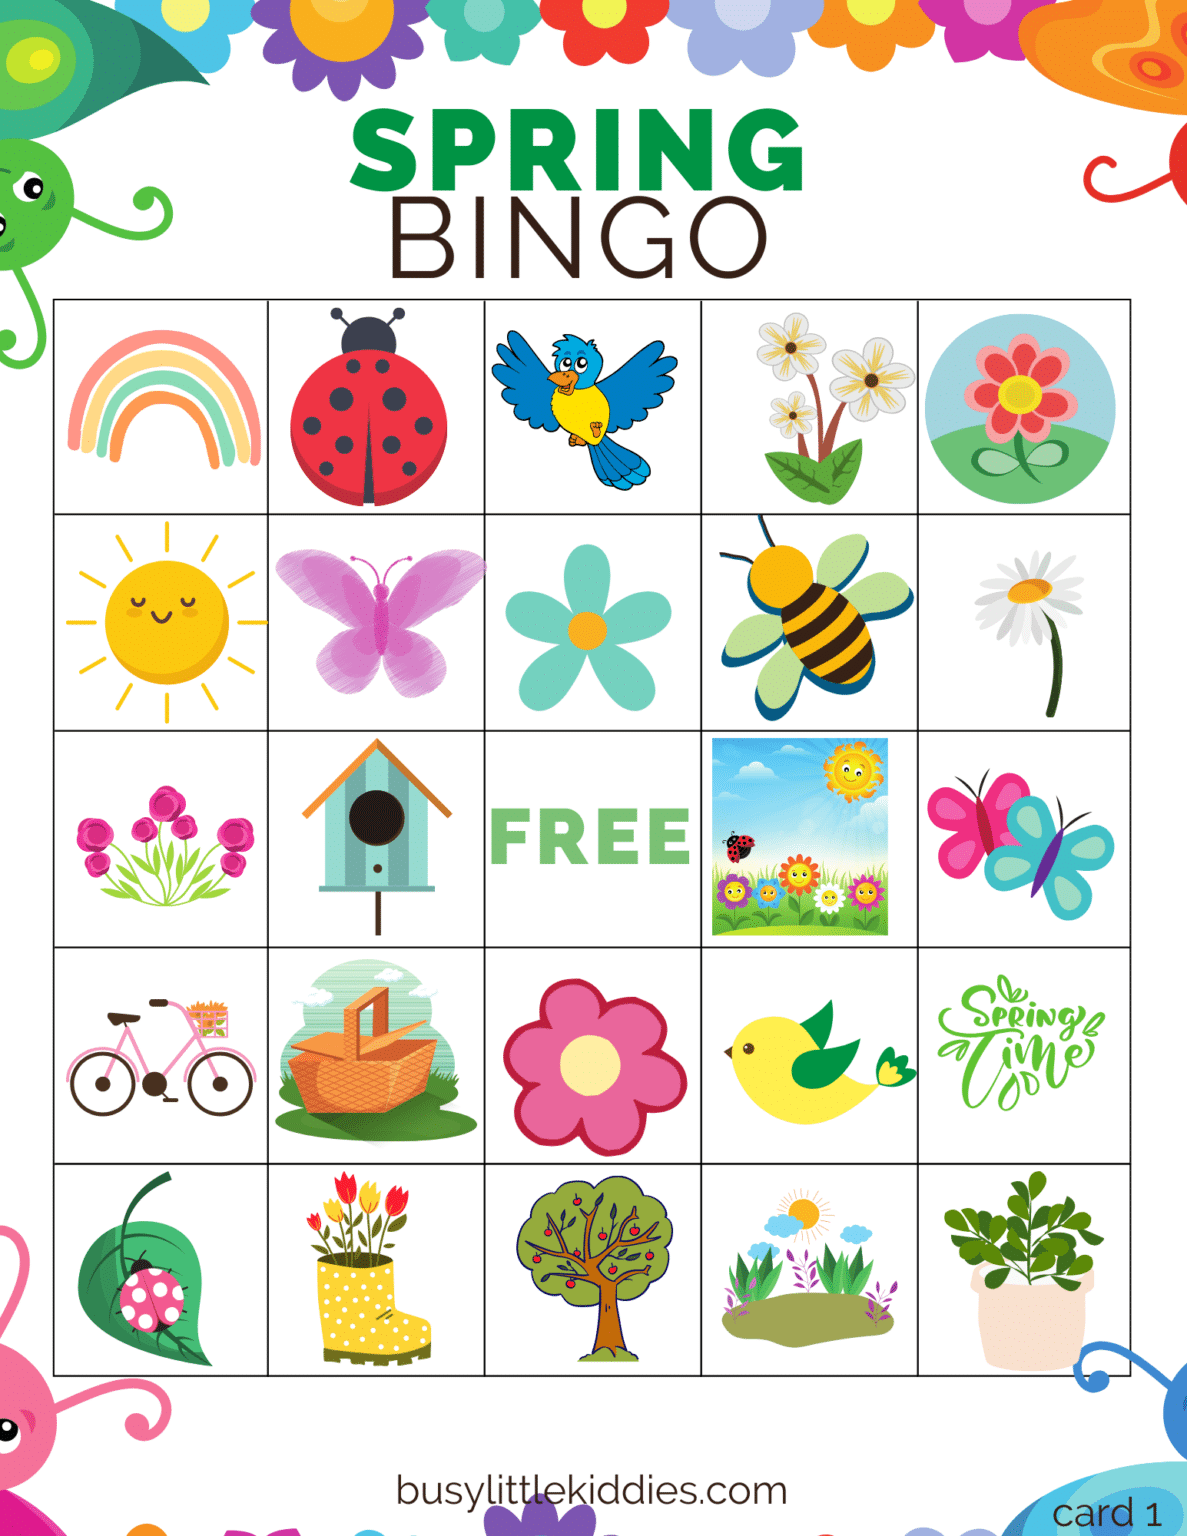 spring-bingo-free-printable-for-kids-4-players-busy-little-kiddies-blk